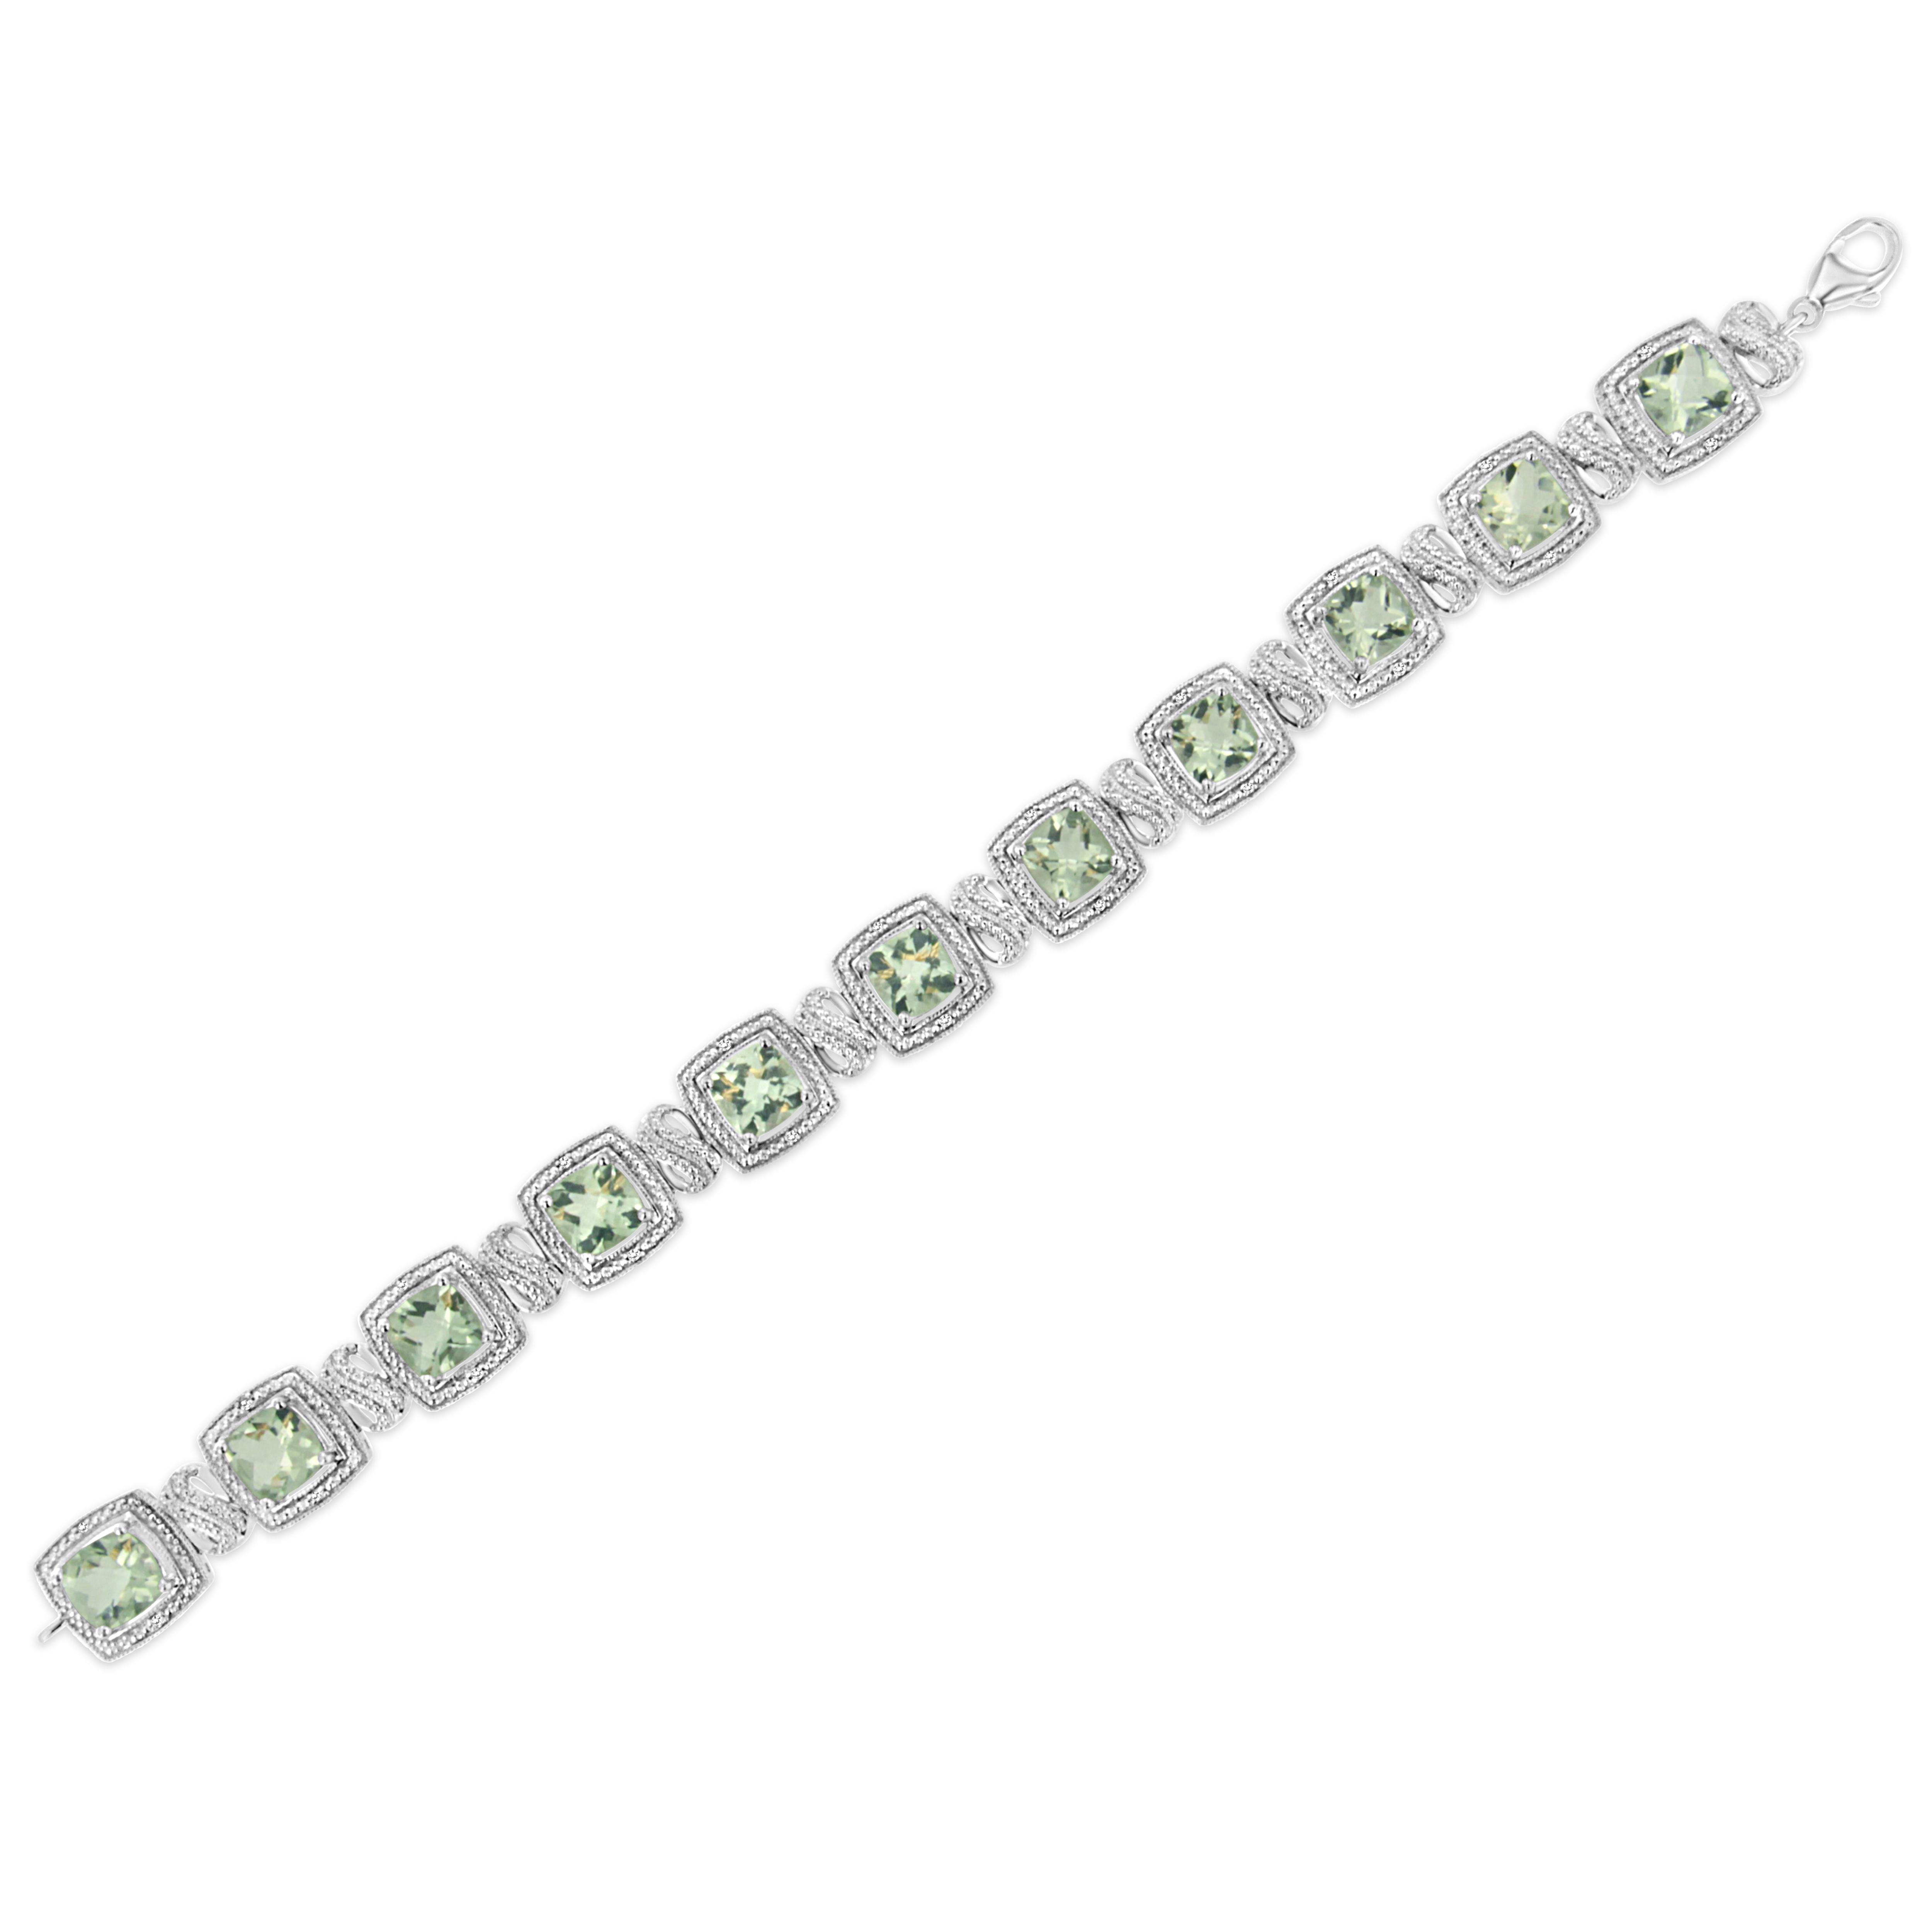 Contemporary .925 Sterling Silver Green Amethyst and 1/10 Carat Diamond Tennis Bracelet